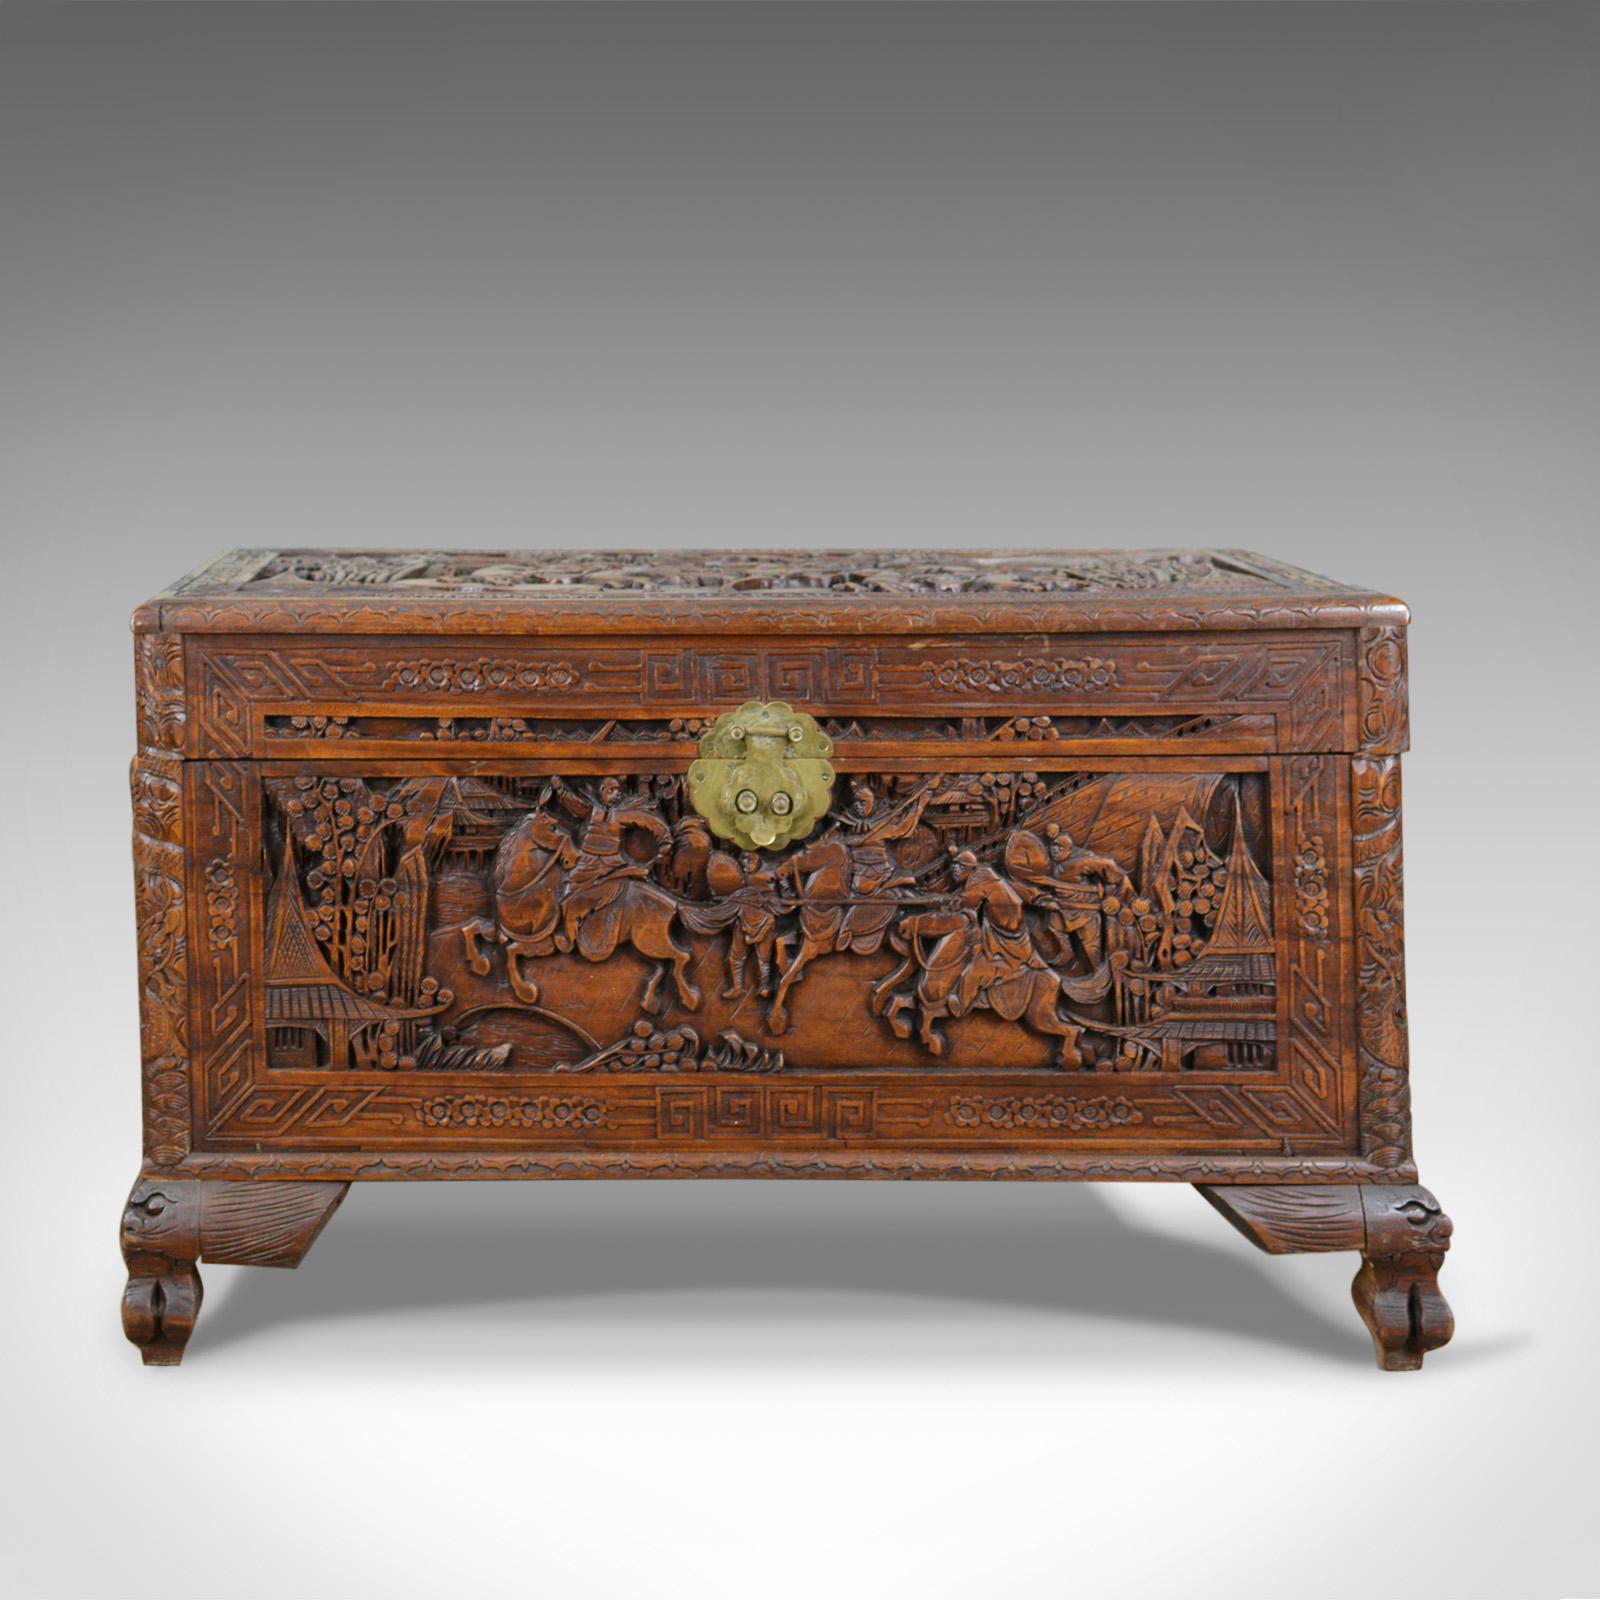 This is an early 20th century camphor wood chest with oriental carved scenes. A trunk dating to the early 20th century, circa 1930.

Fabulously decorated with profusely carved panels
Delineated with geometric frames and bands
Standing upon